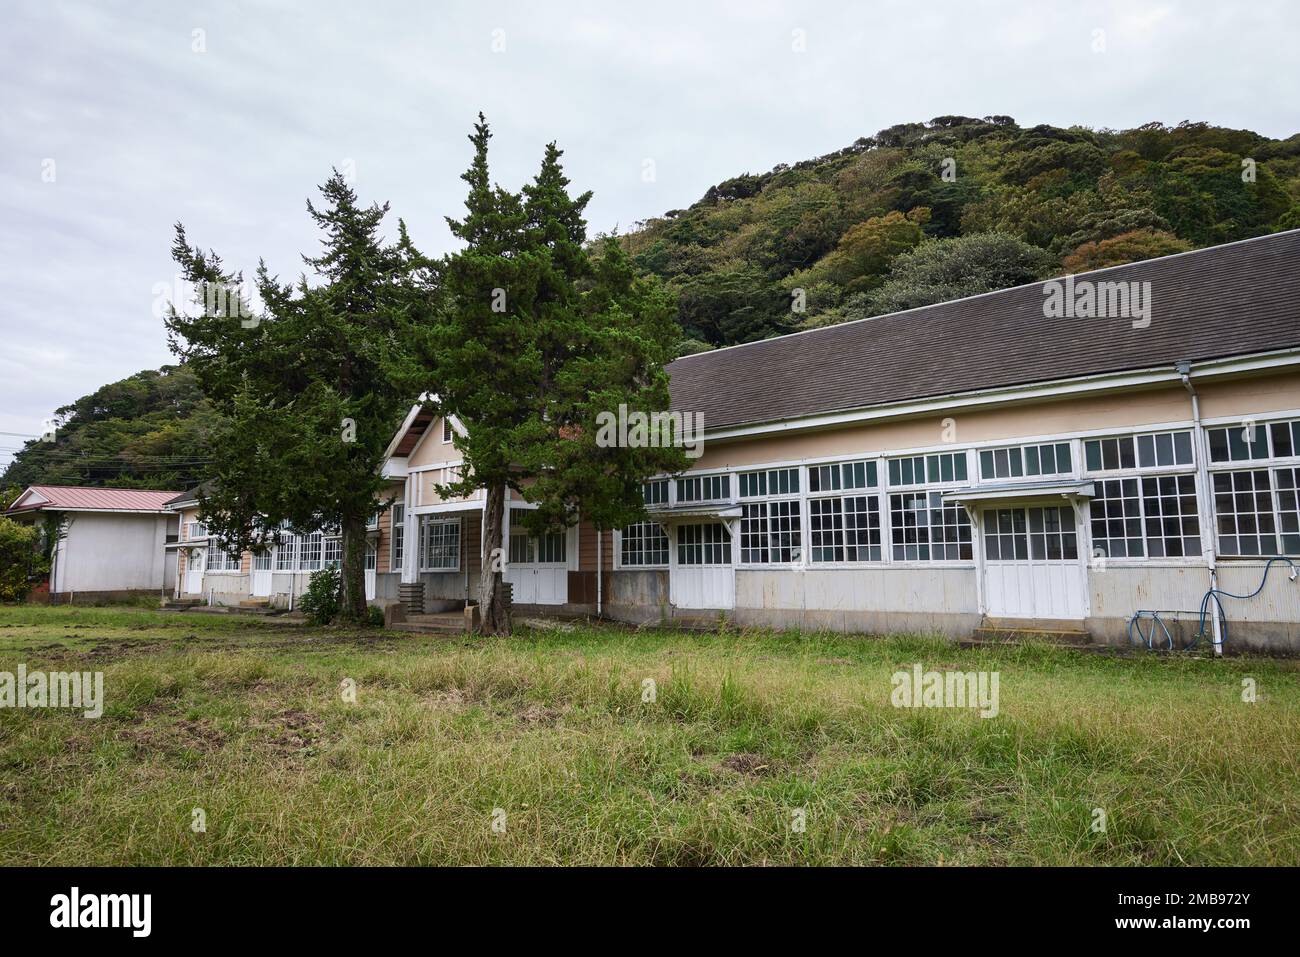 Abandoned school in the Japanese countryside Stock Photo